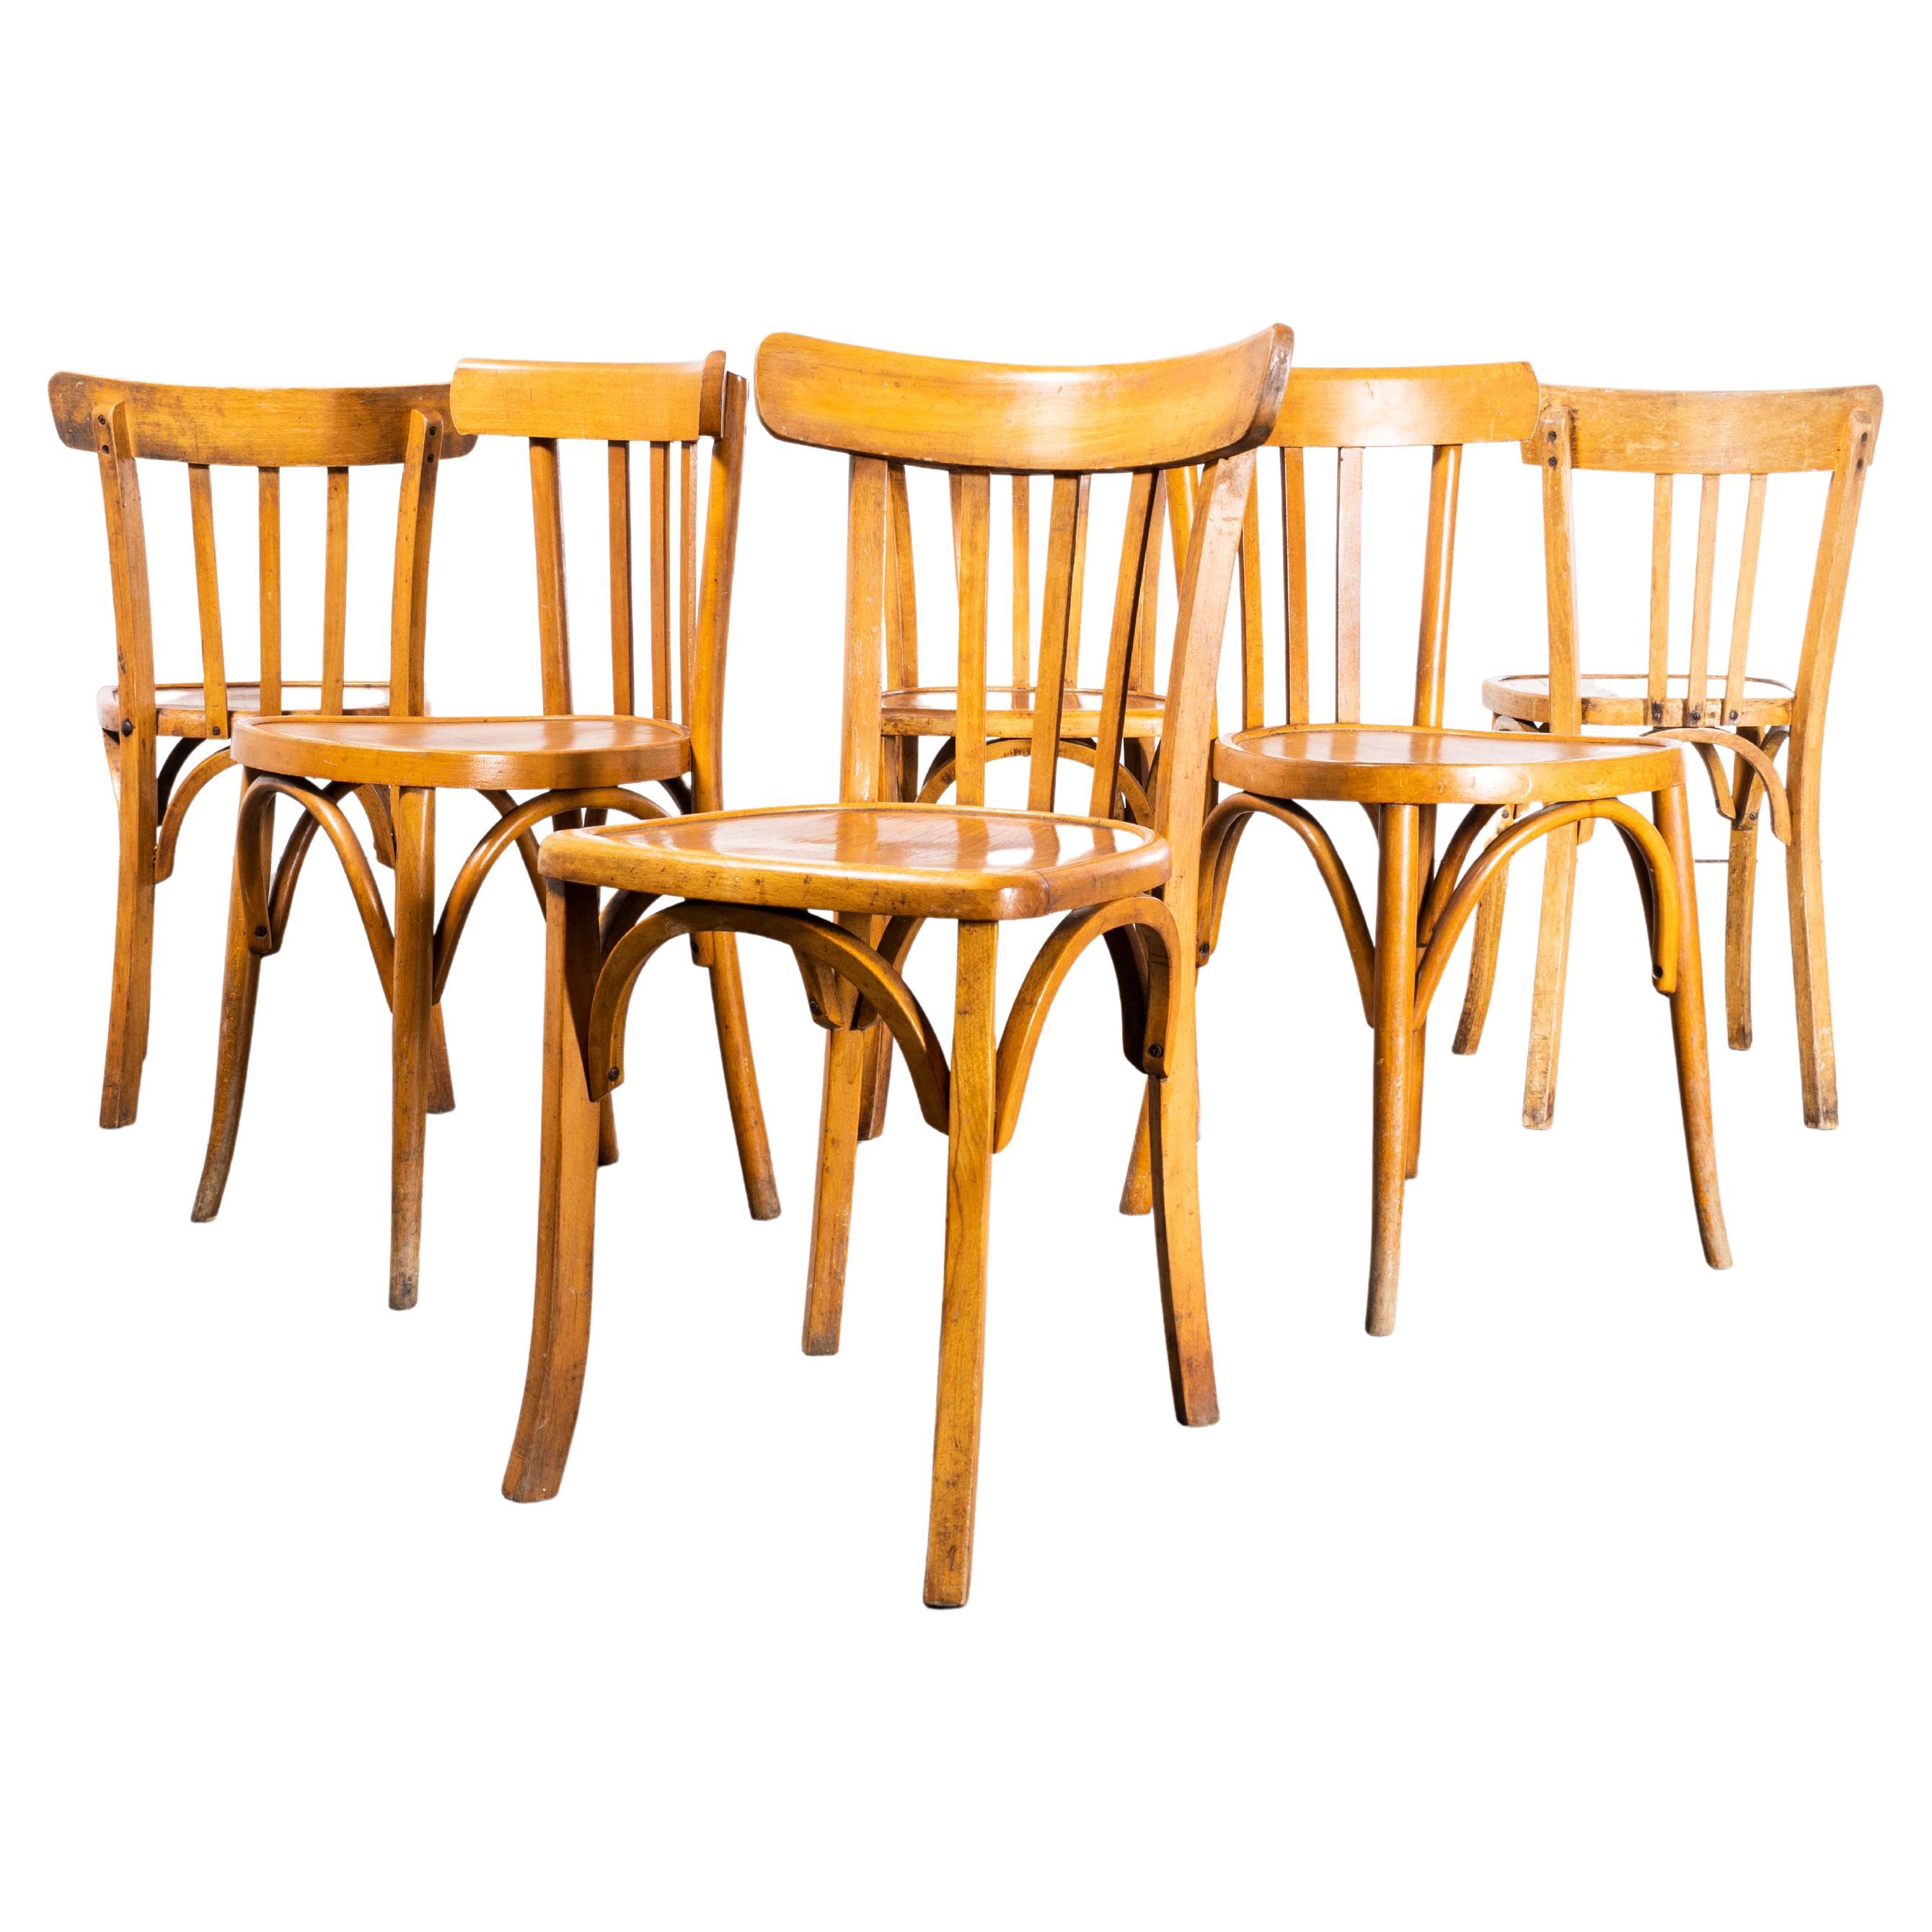 1950's Luterma Honey Oak Bentwood Dining Chair - Set Of Six For Sale